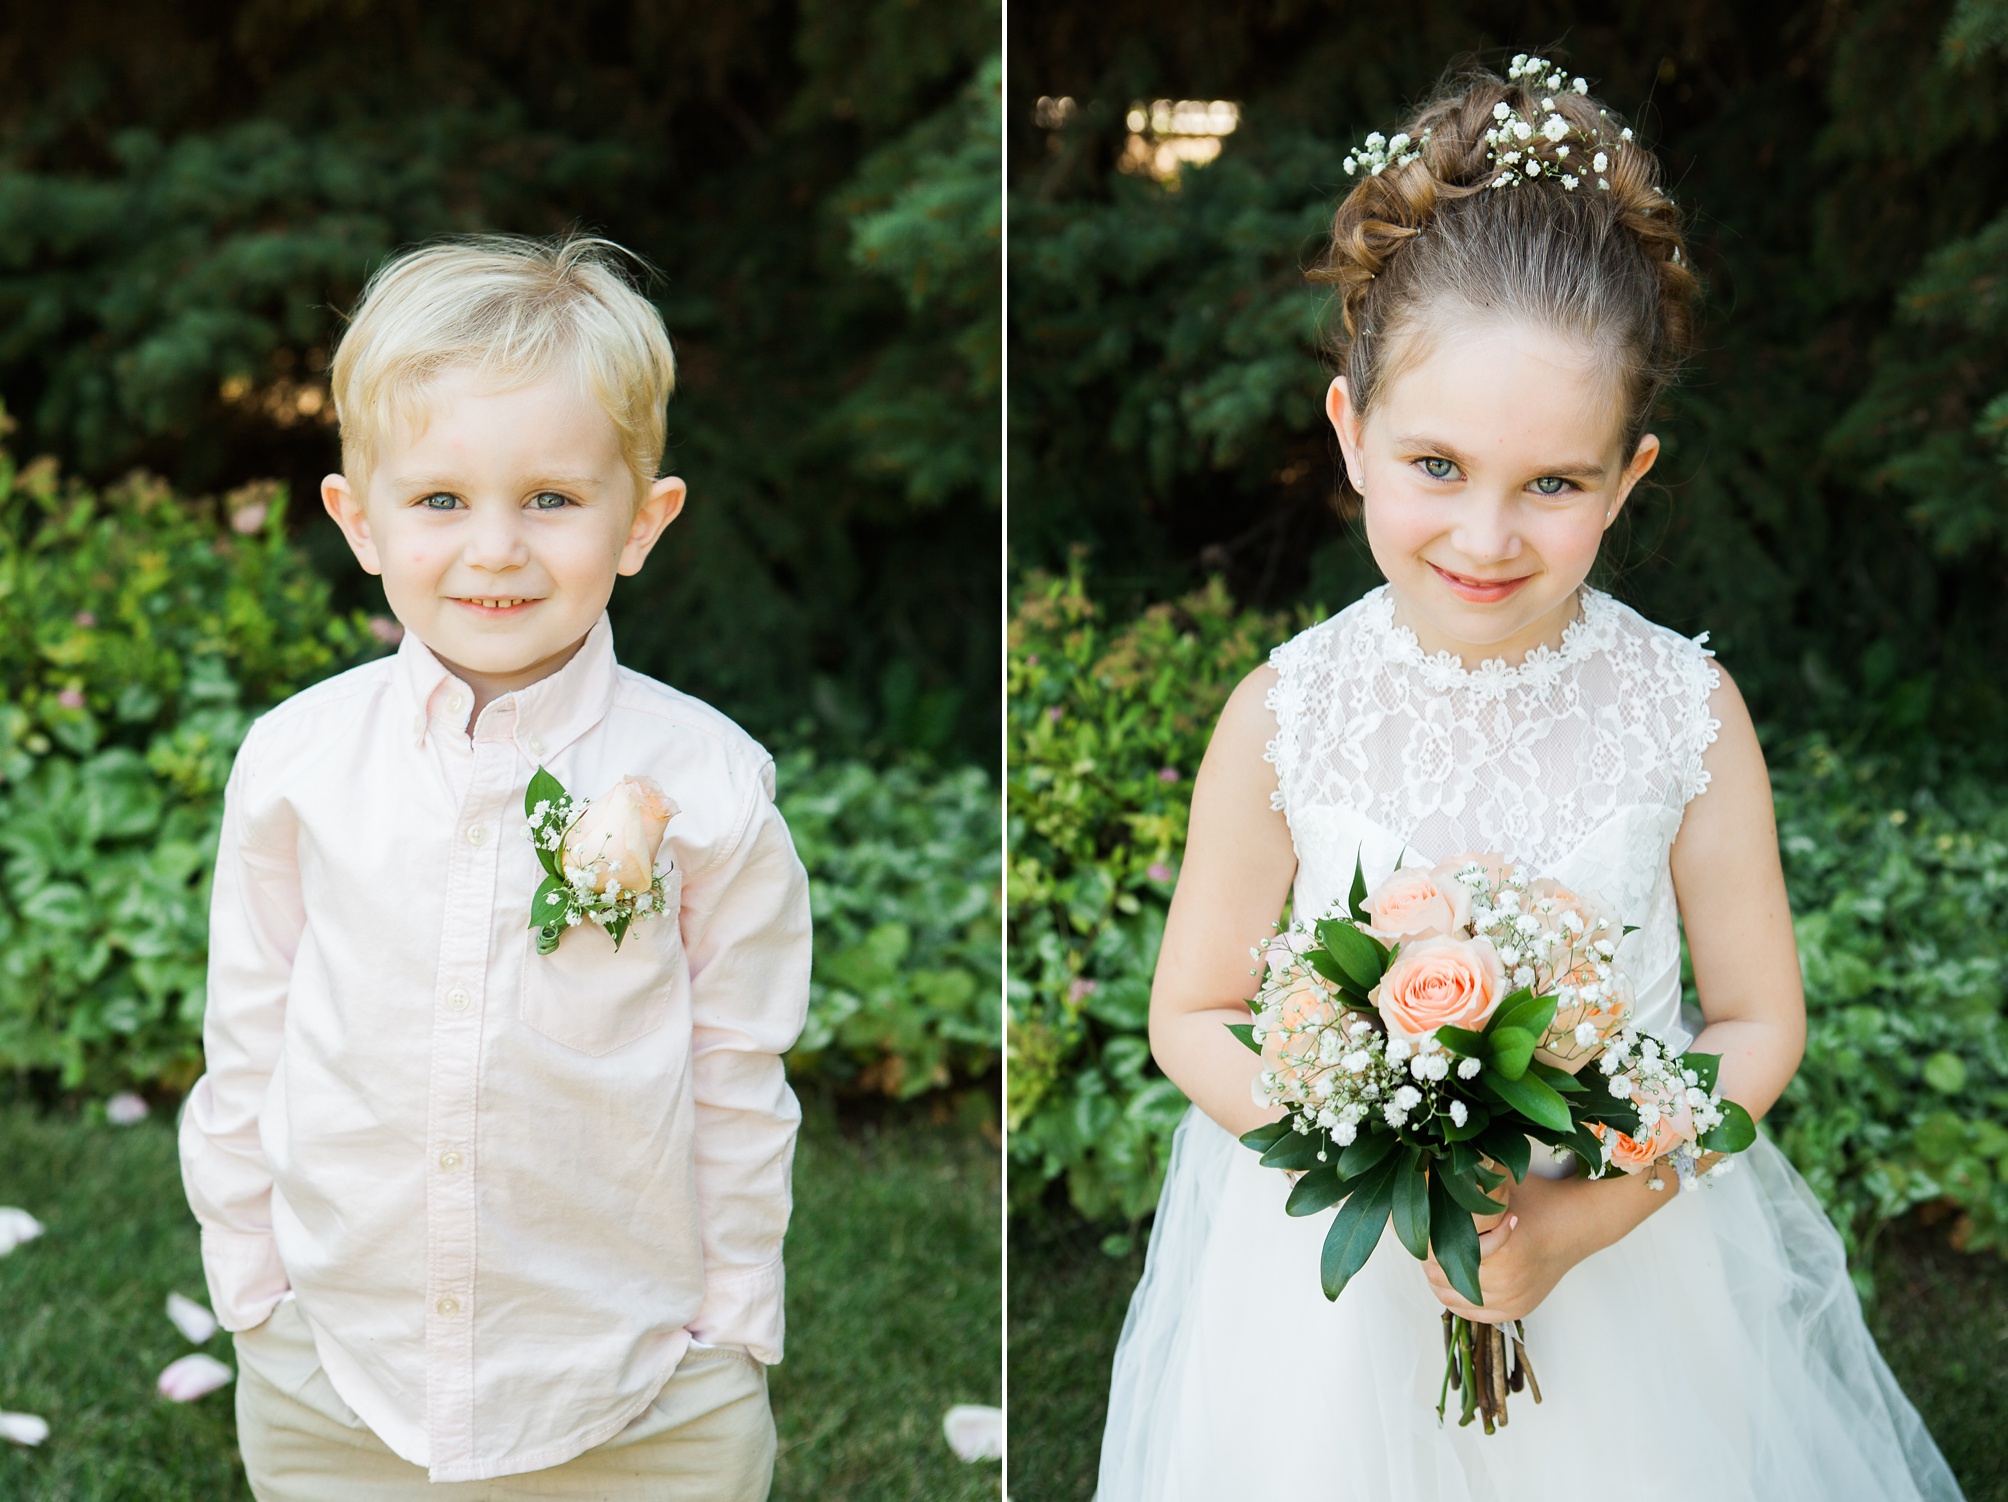 Cutest ring bearer and flower girl at this casual pink and white backyard wedding 